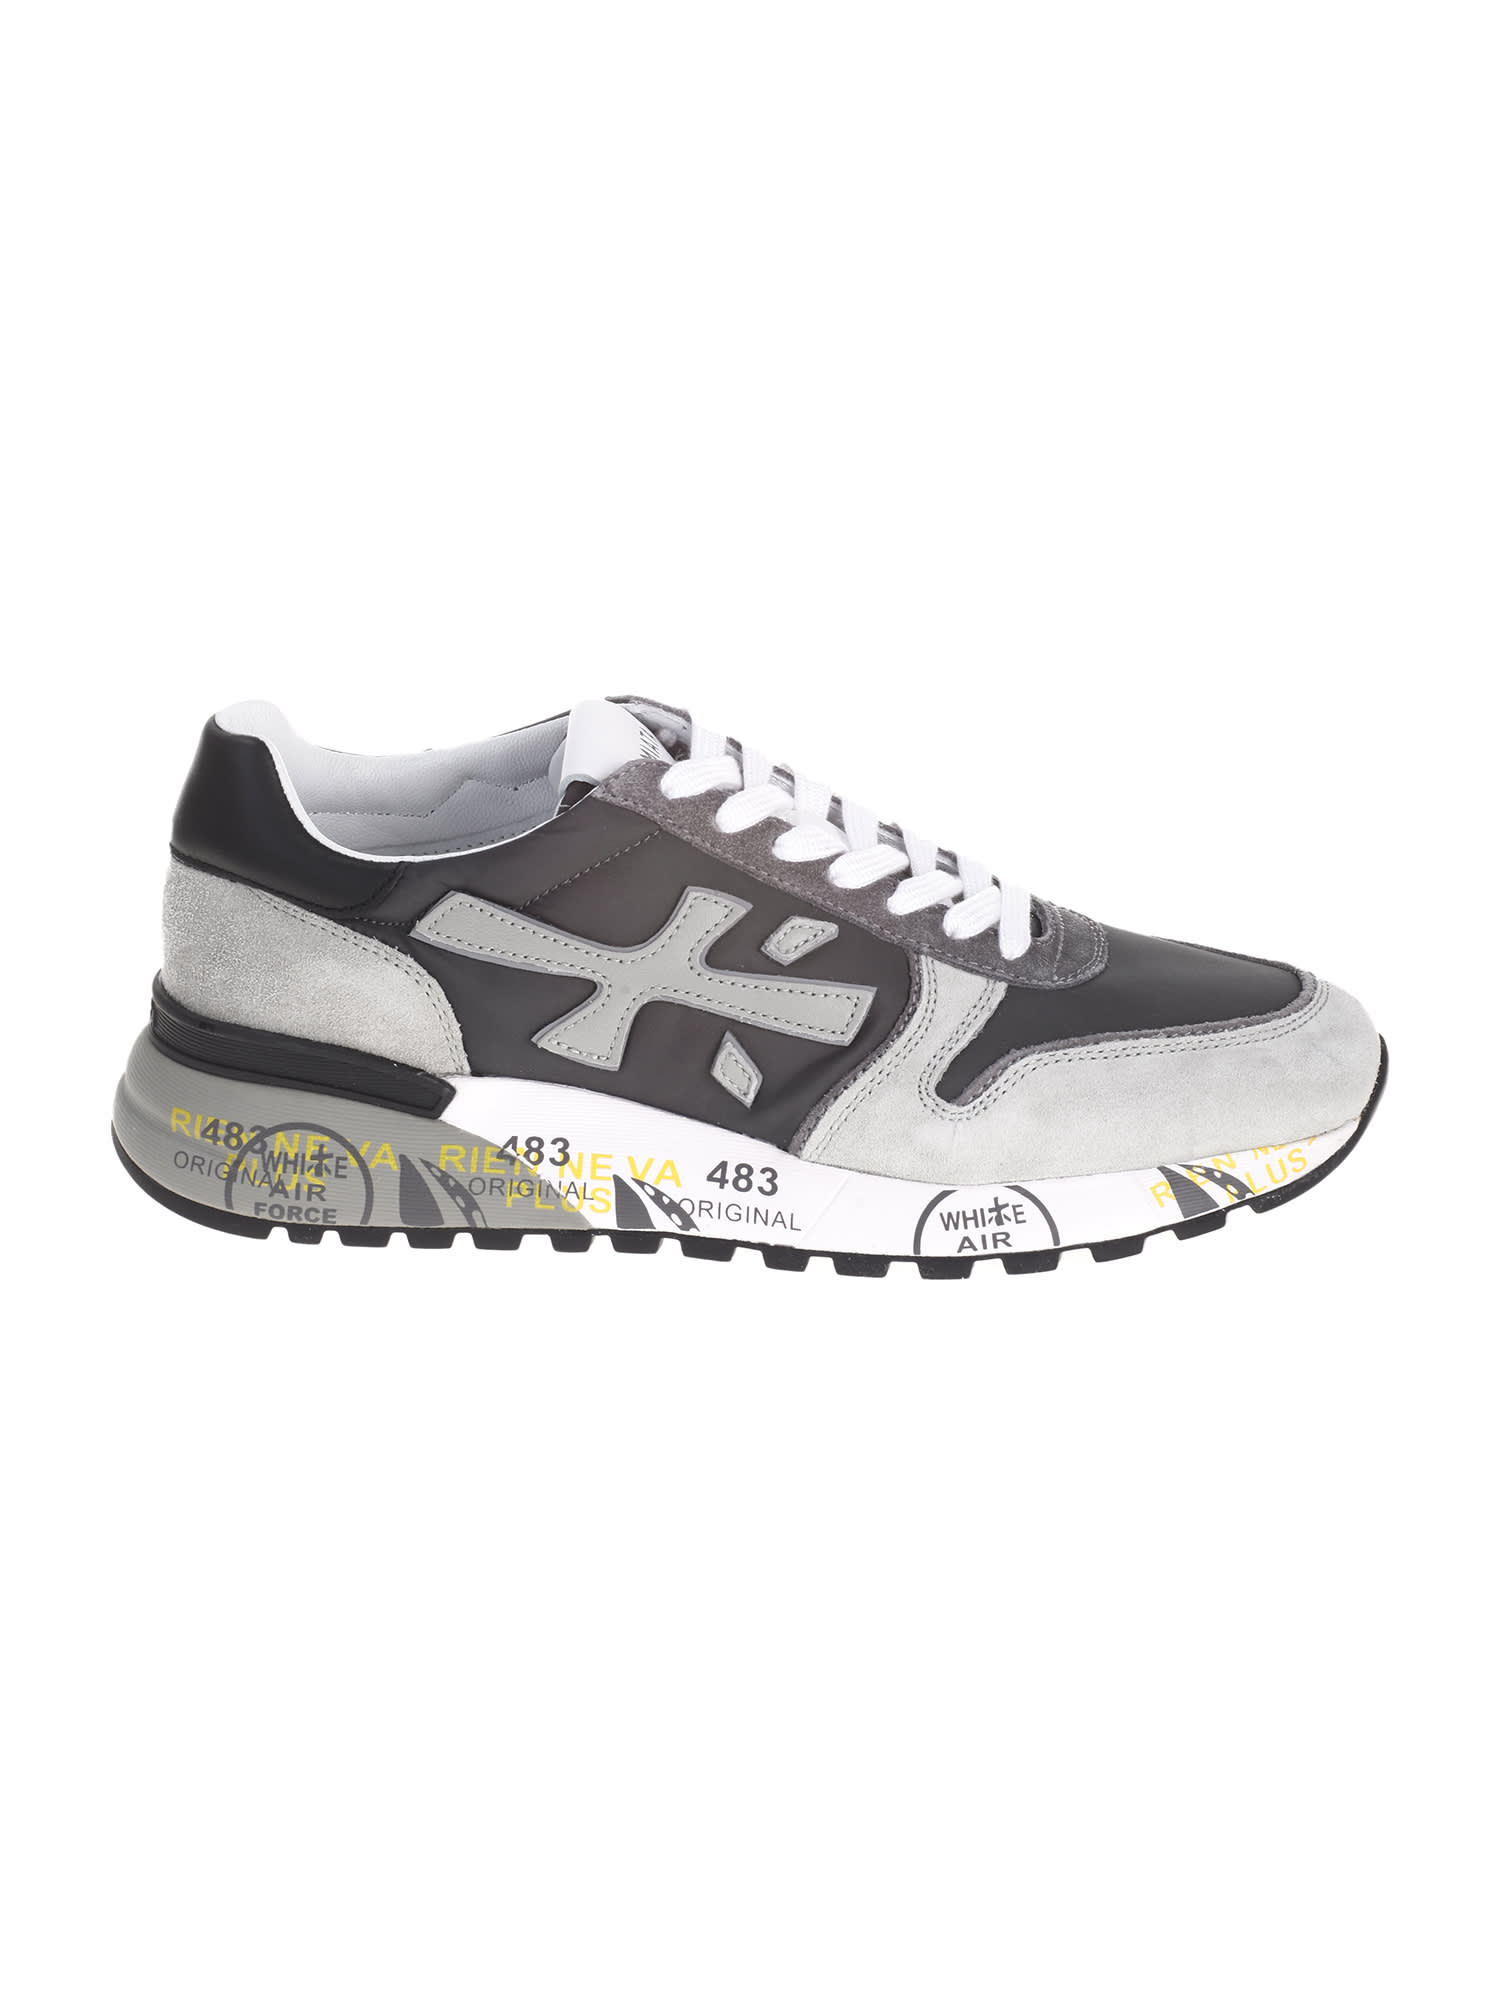 Premiata Mick sneakers a mix of technical materials and high quality leathers